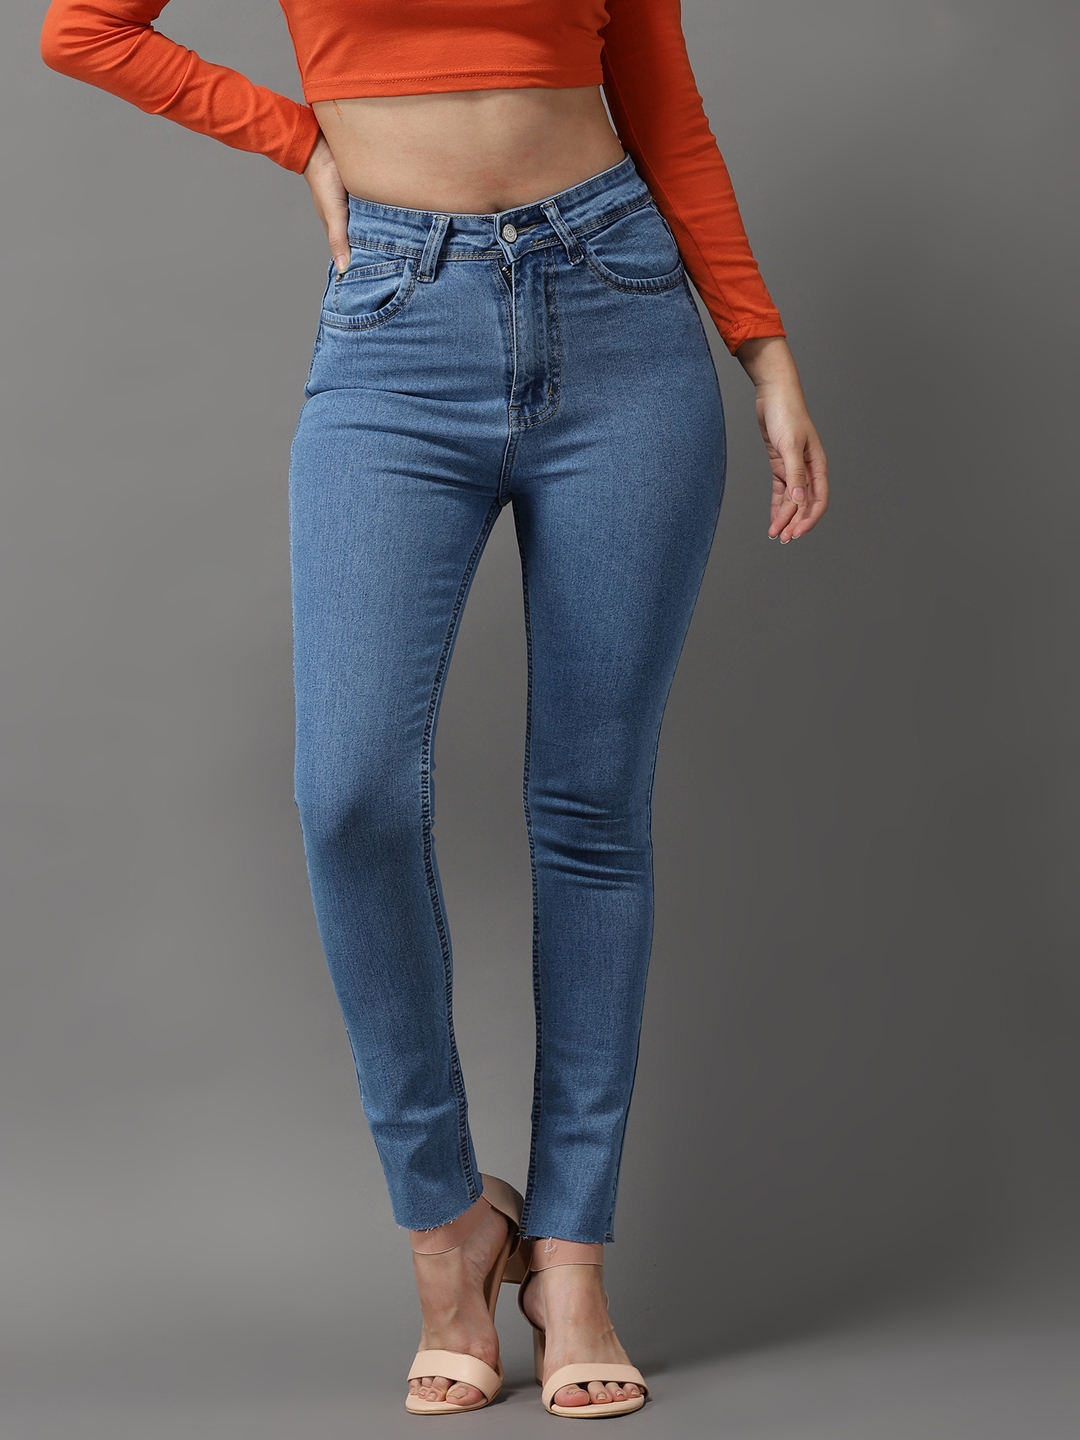 Showoff | SHOWOFF Women's Clean Look Blue Skinny Fit Jeans